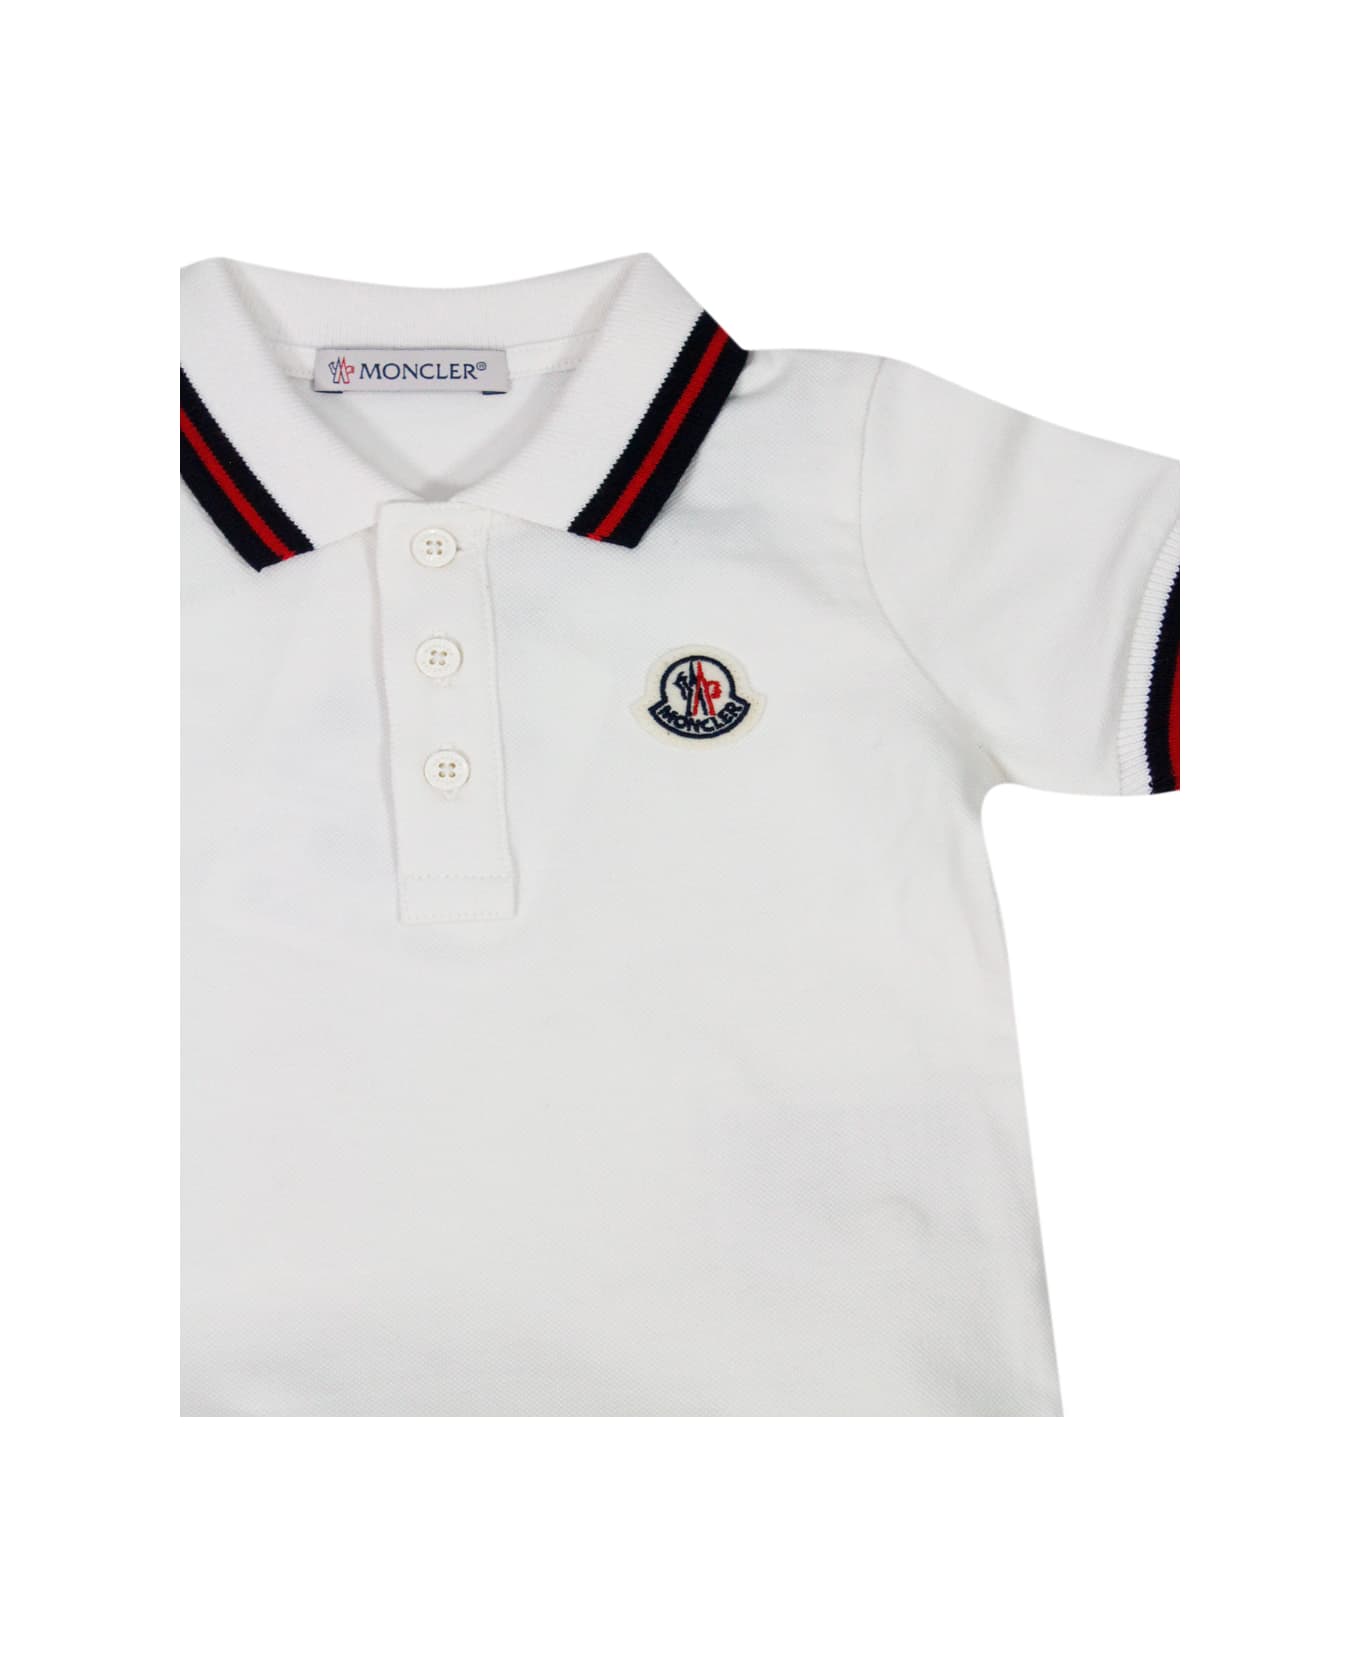 Moncler Complete With Short Sleeve Polo Shirt And Shorts With Elastic Waist - White ジャンプスーツ